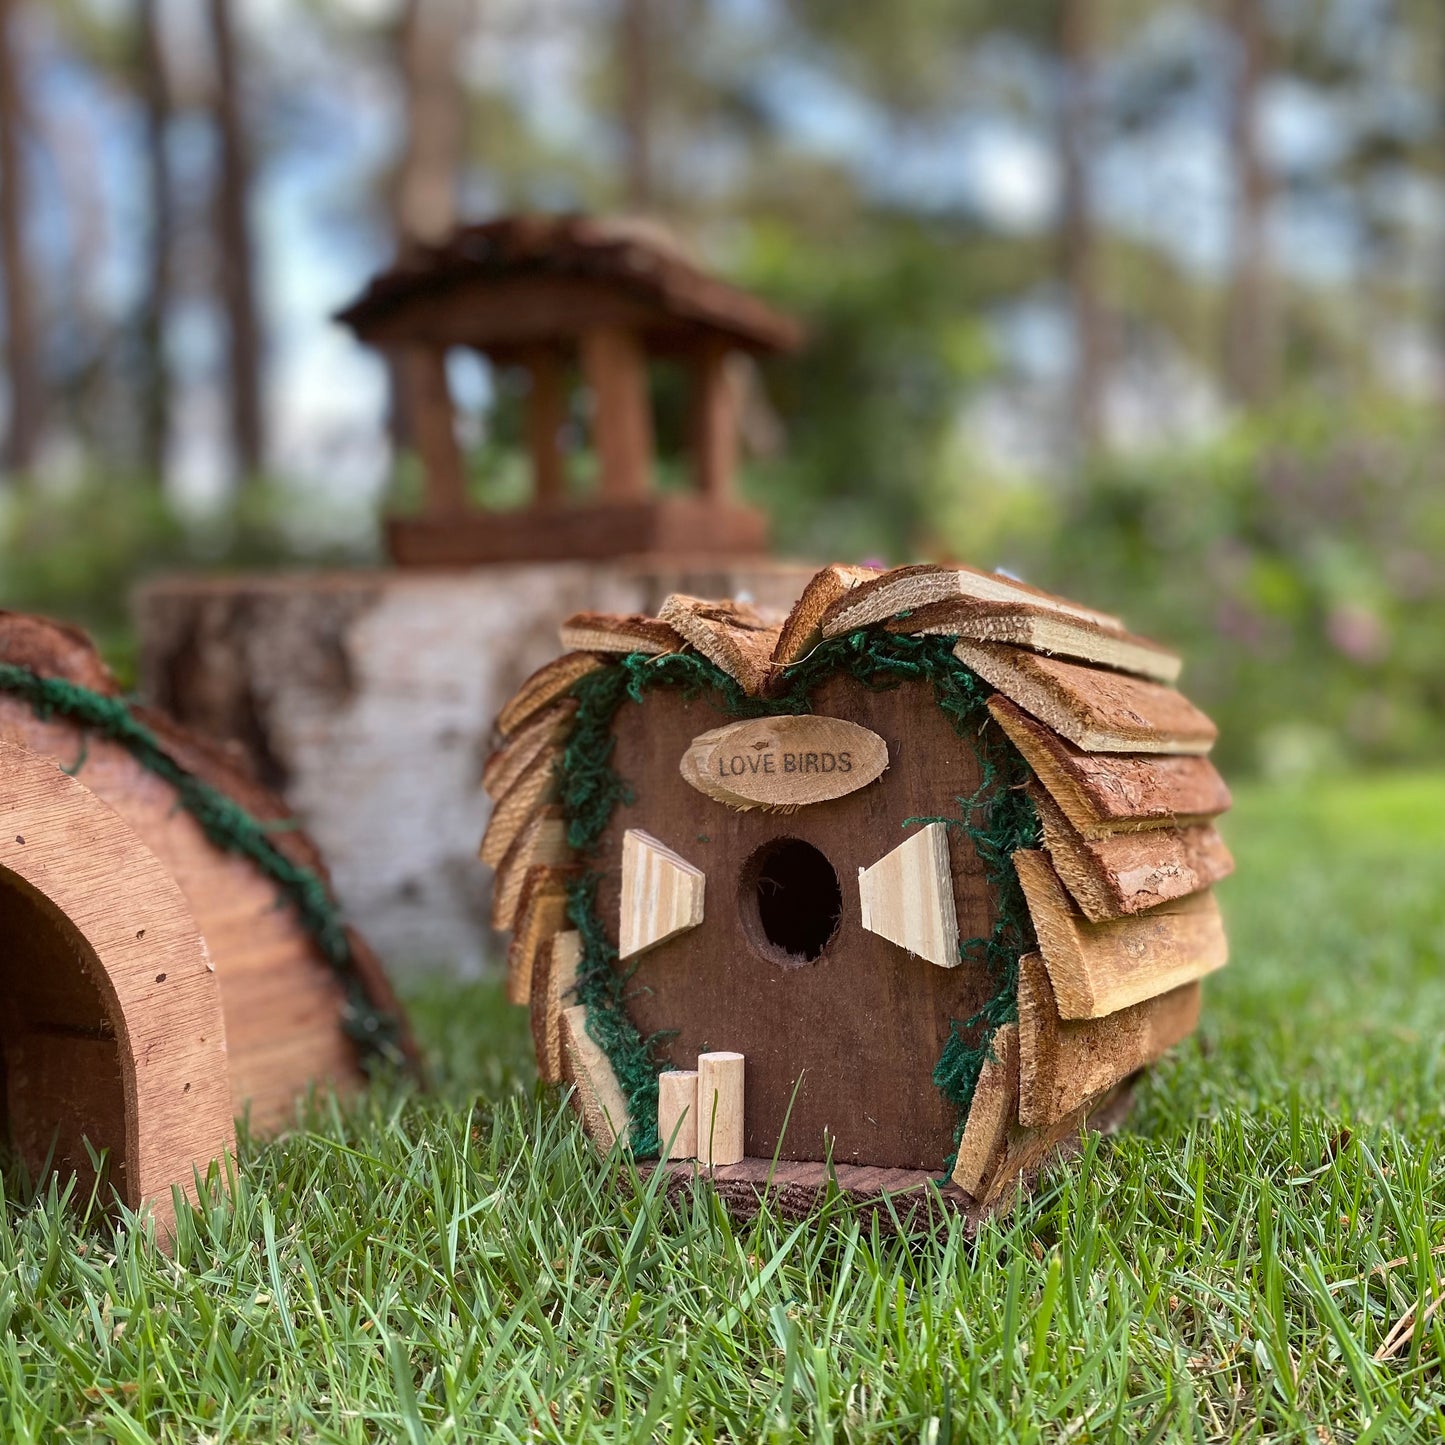 Wooden Hedgehog Hogitat with Bird House and Hanging Feeder